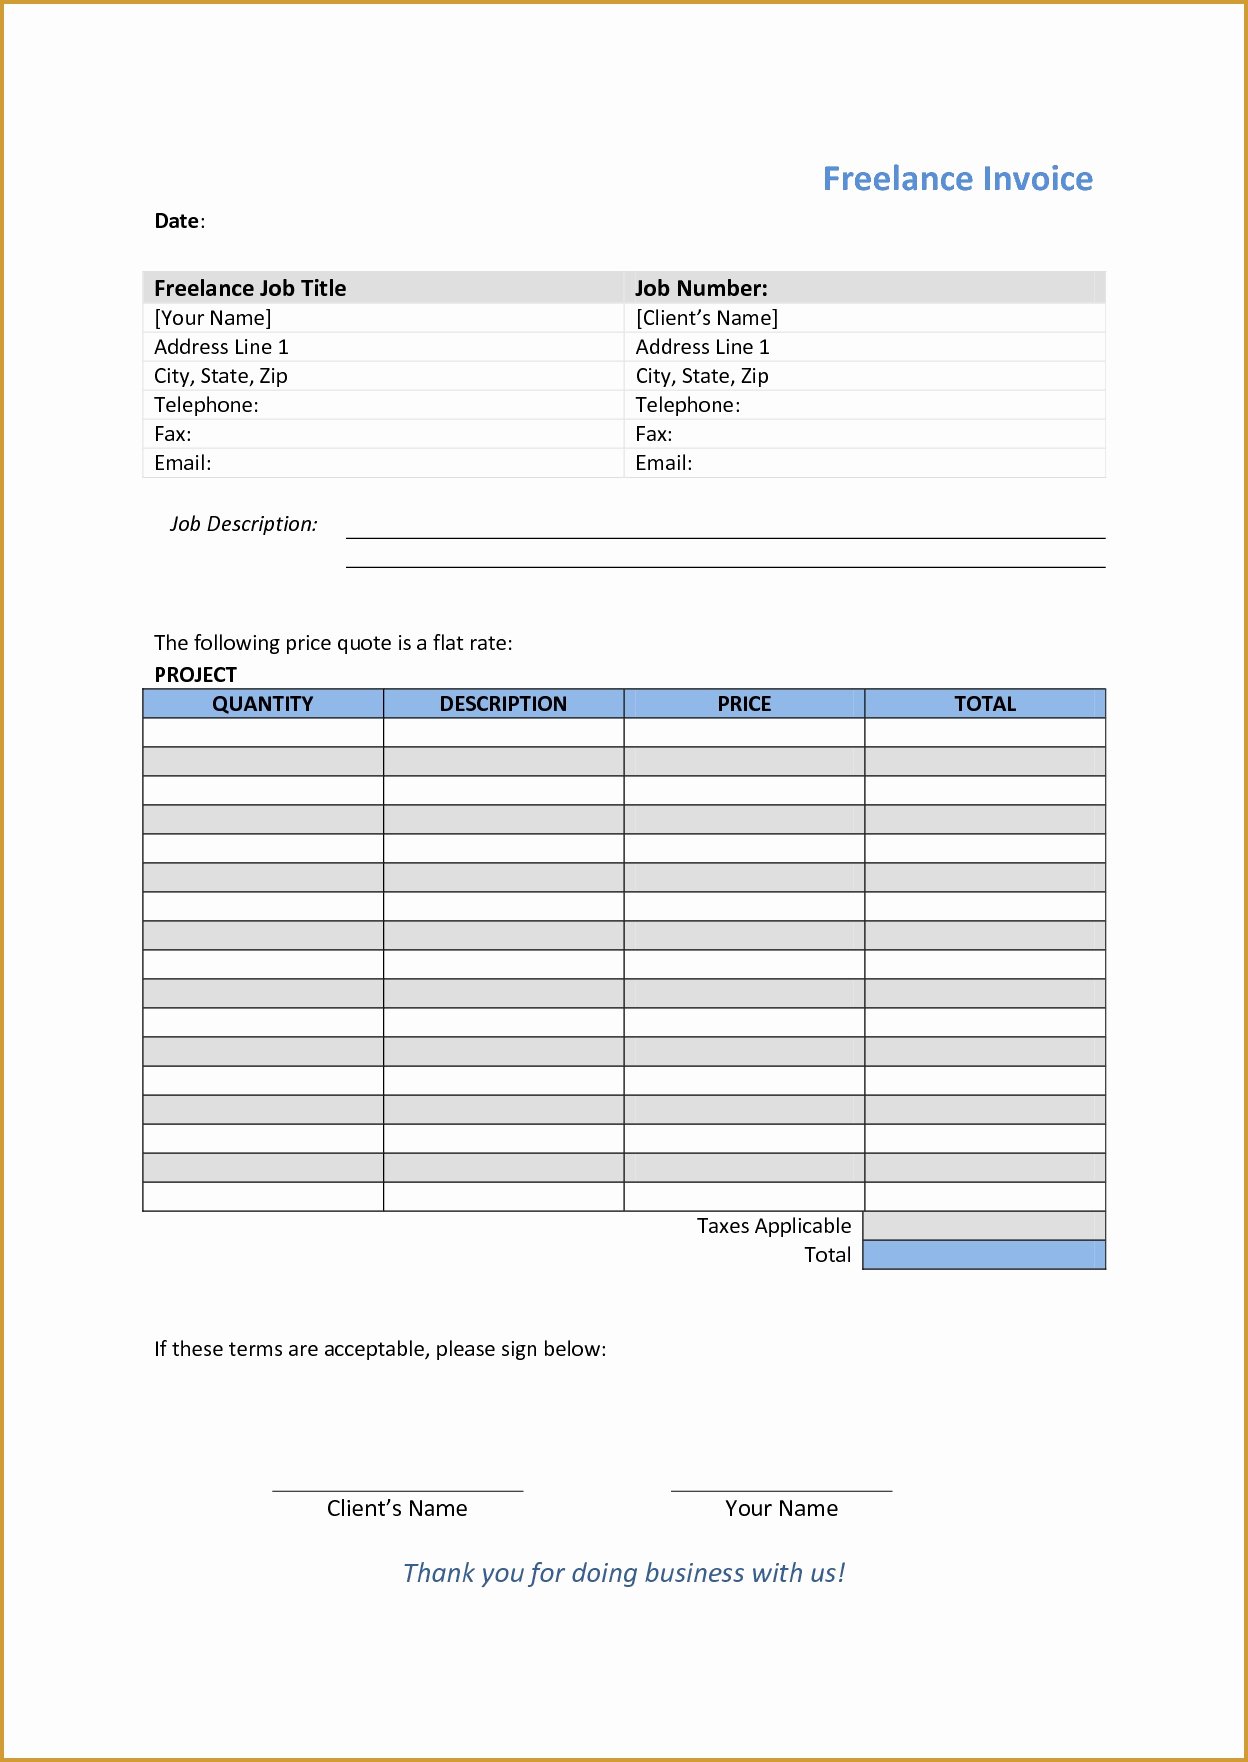 Freelance Writing Invoice Template New Freelance Writing Invoice Invoice Template Ideas